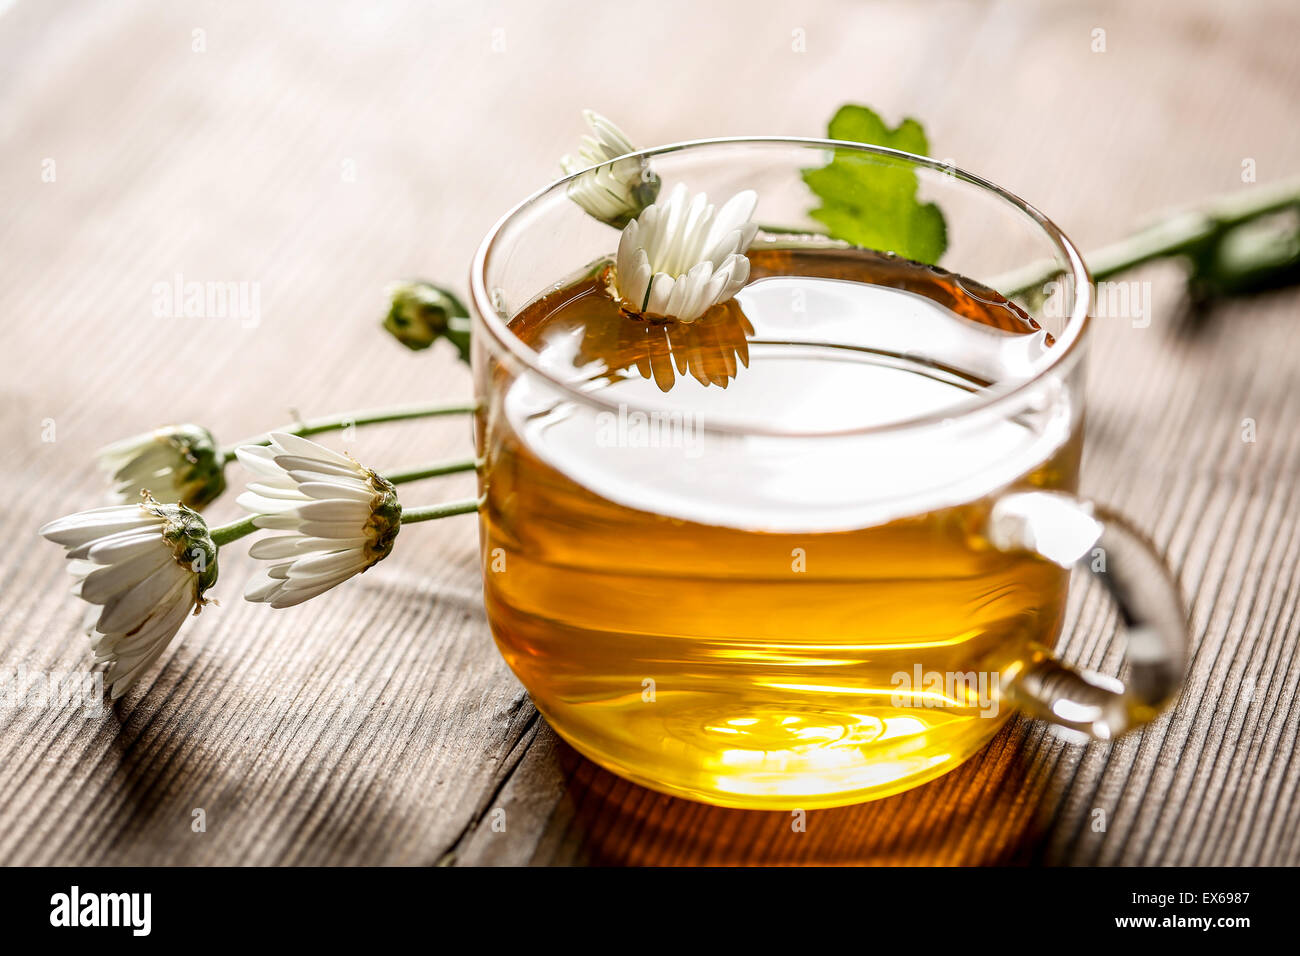 Herbal tea in a glass cup and flowers Stock Photo